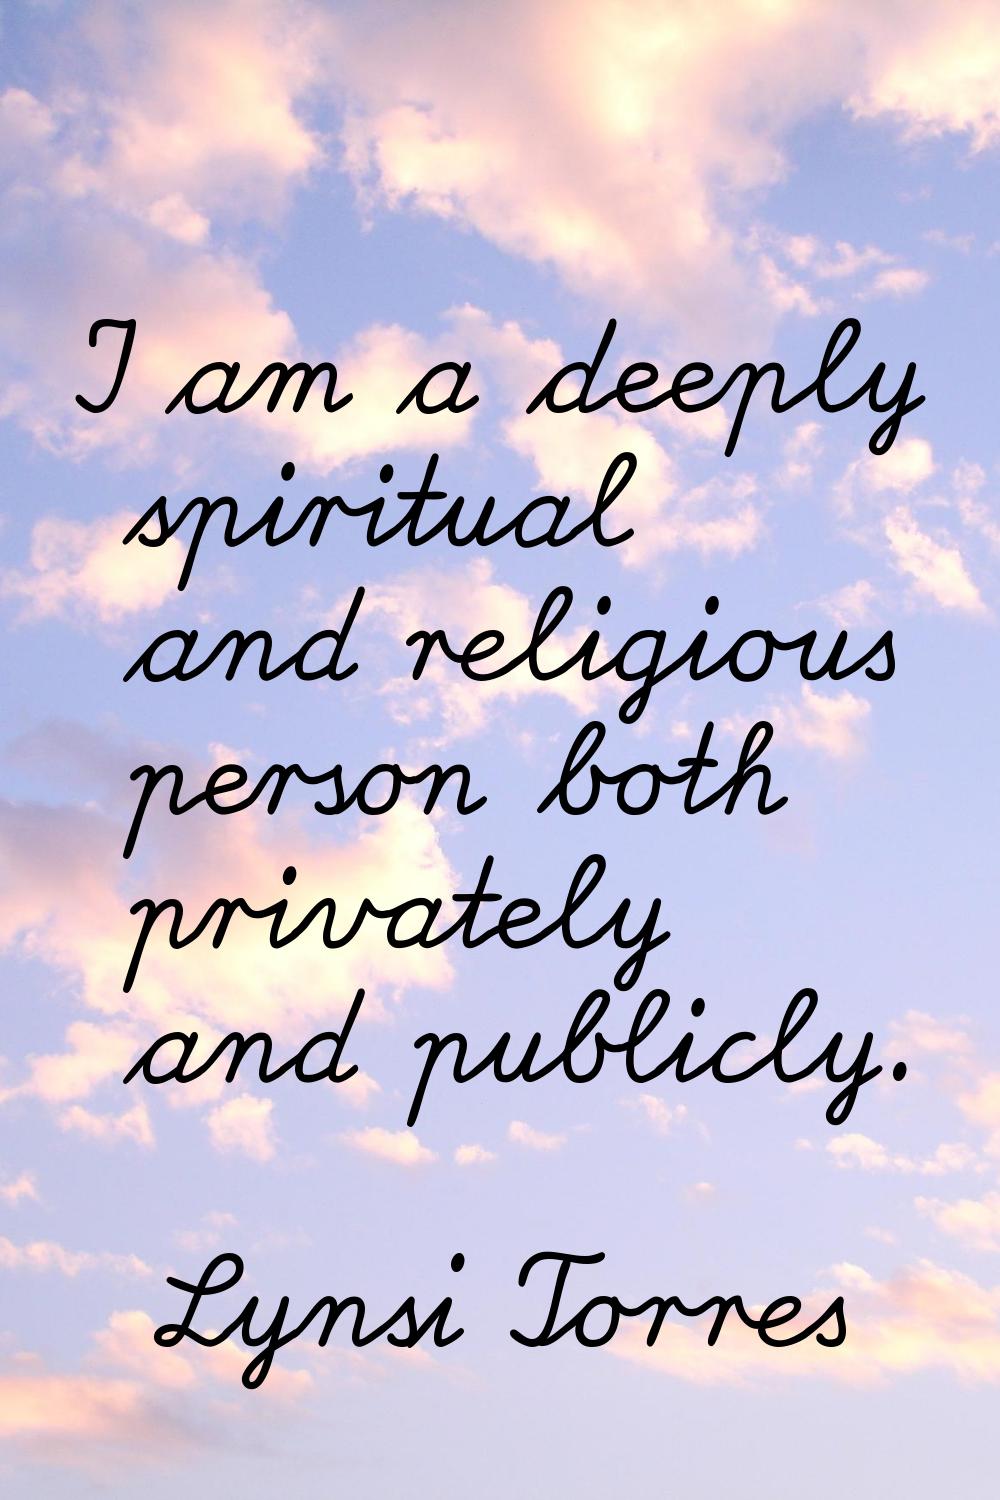 I am a deeply spiritual and religious person both privately and publicly.